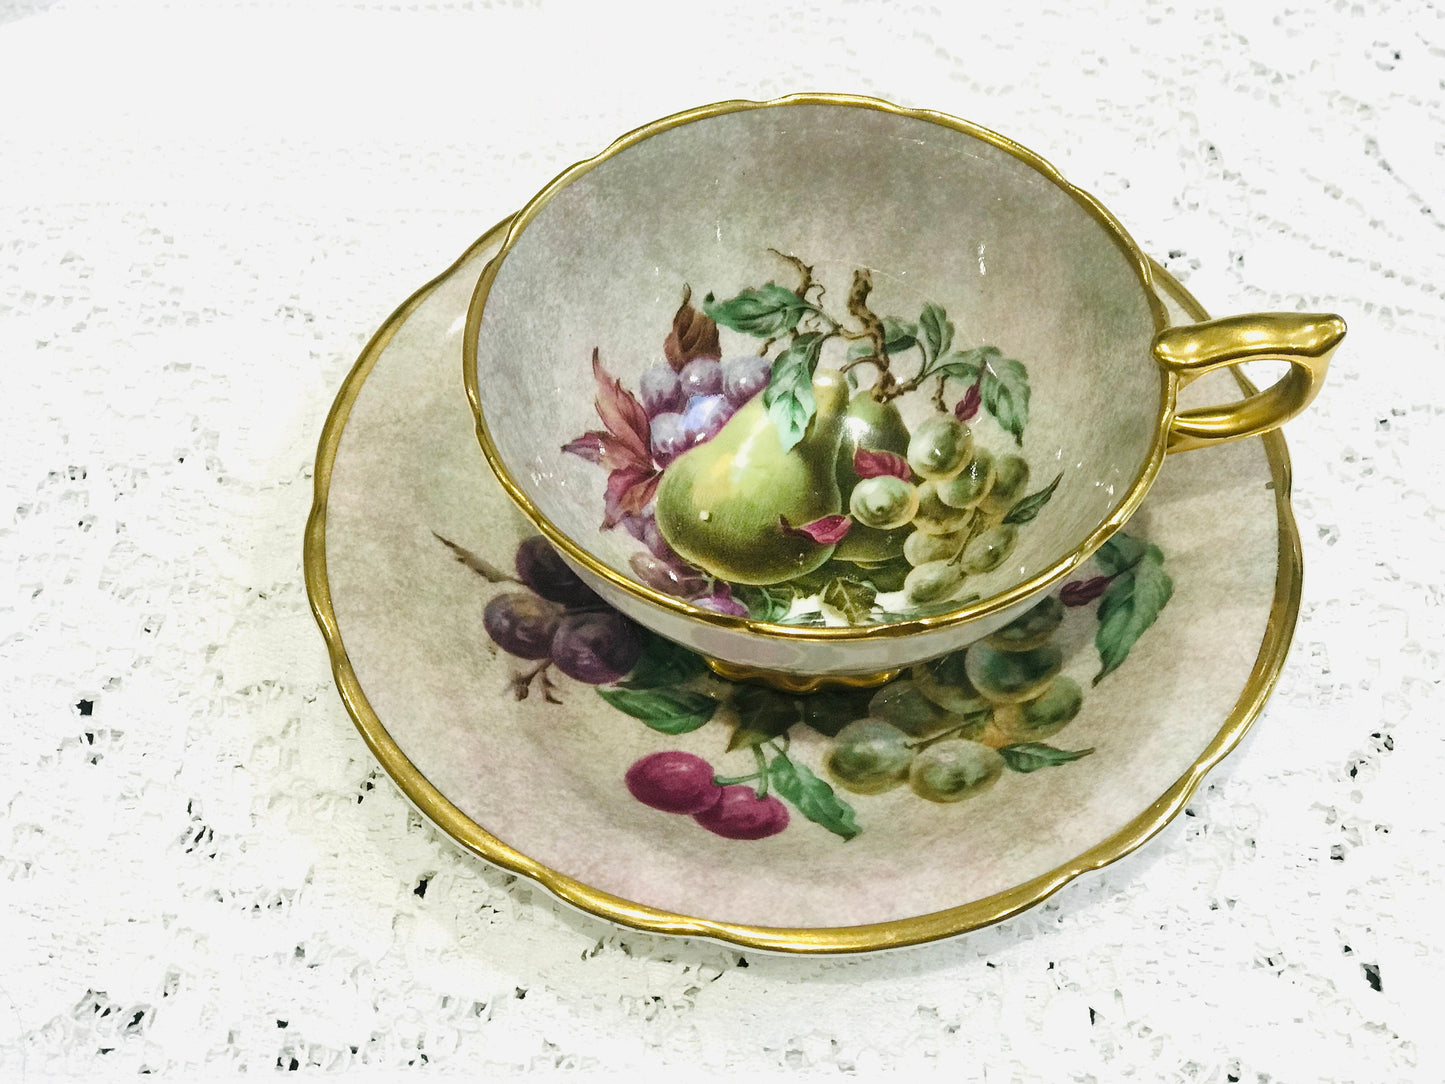 Salisbury China Teacup Saucer Vintage from England Glazed painted fruit detail